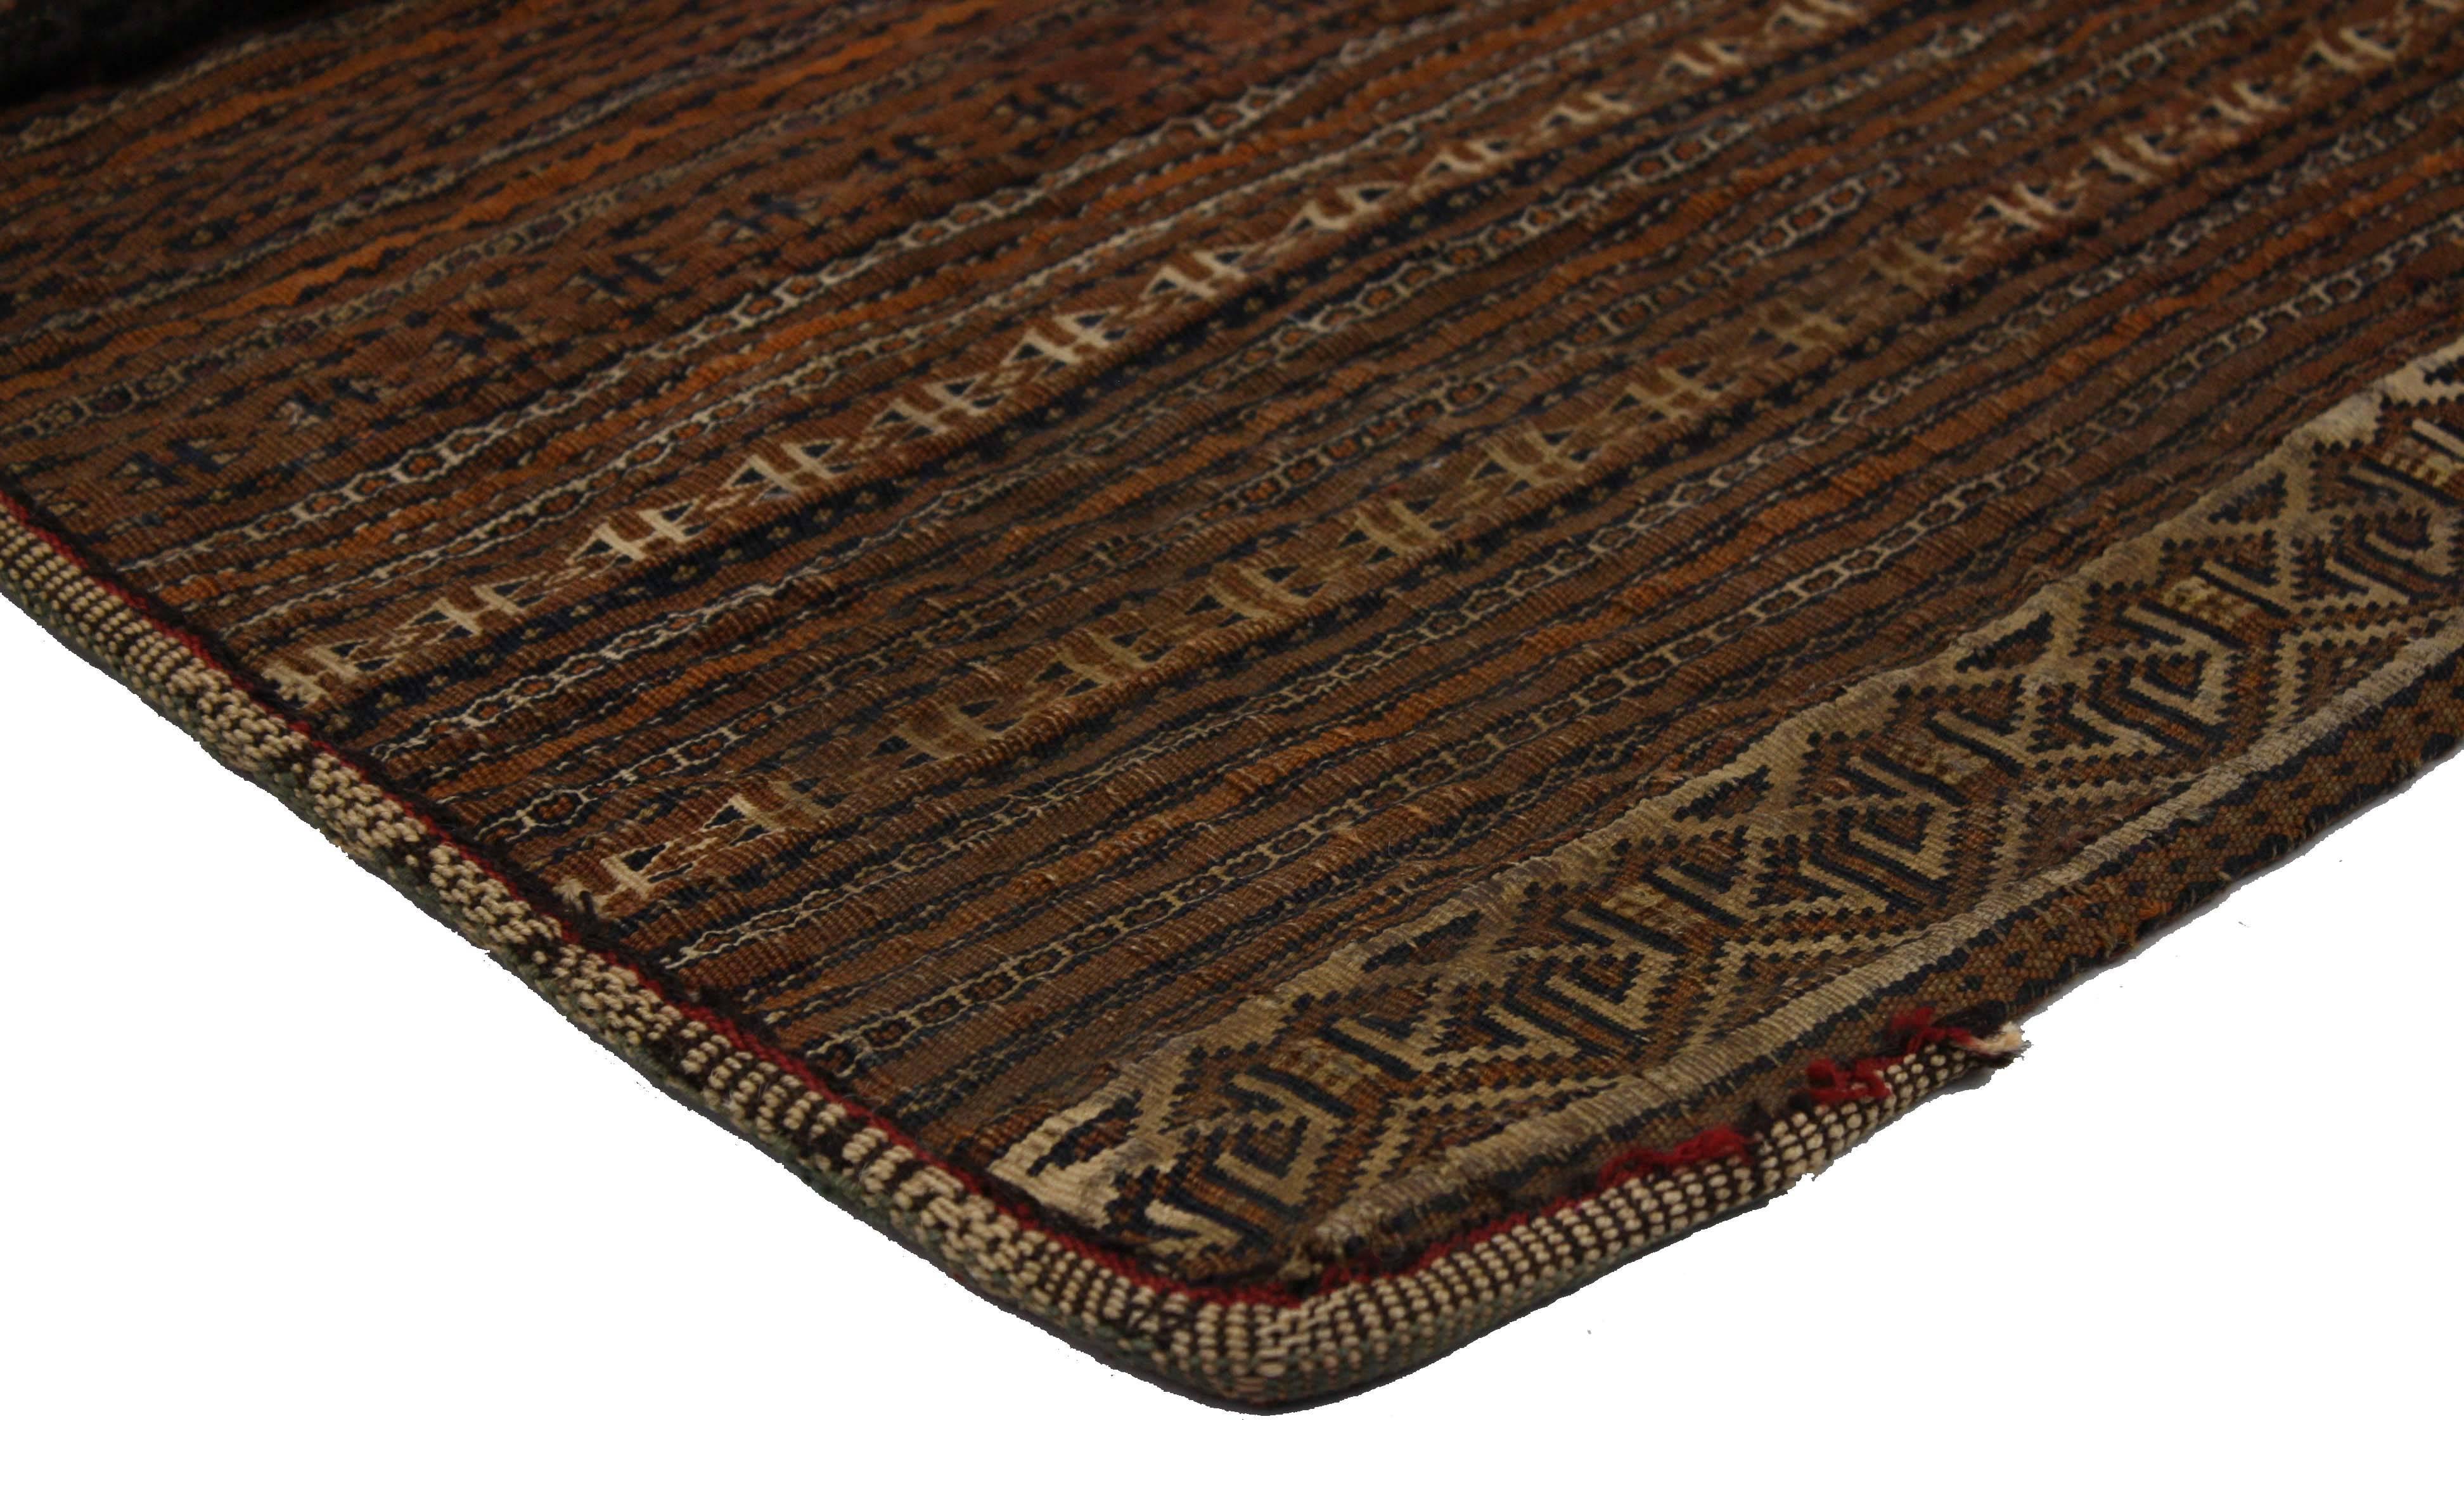 76636, antique Baluch Bagface, Saddlebag, Afghan rug, textile art, tribal wall hanging. This antique Afghan Baluch bagface features an all-over geometric pattern of symbolic ambiguous tribal symbols. These Baluch bag face also known as saddlebags